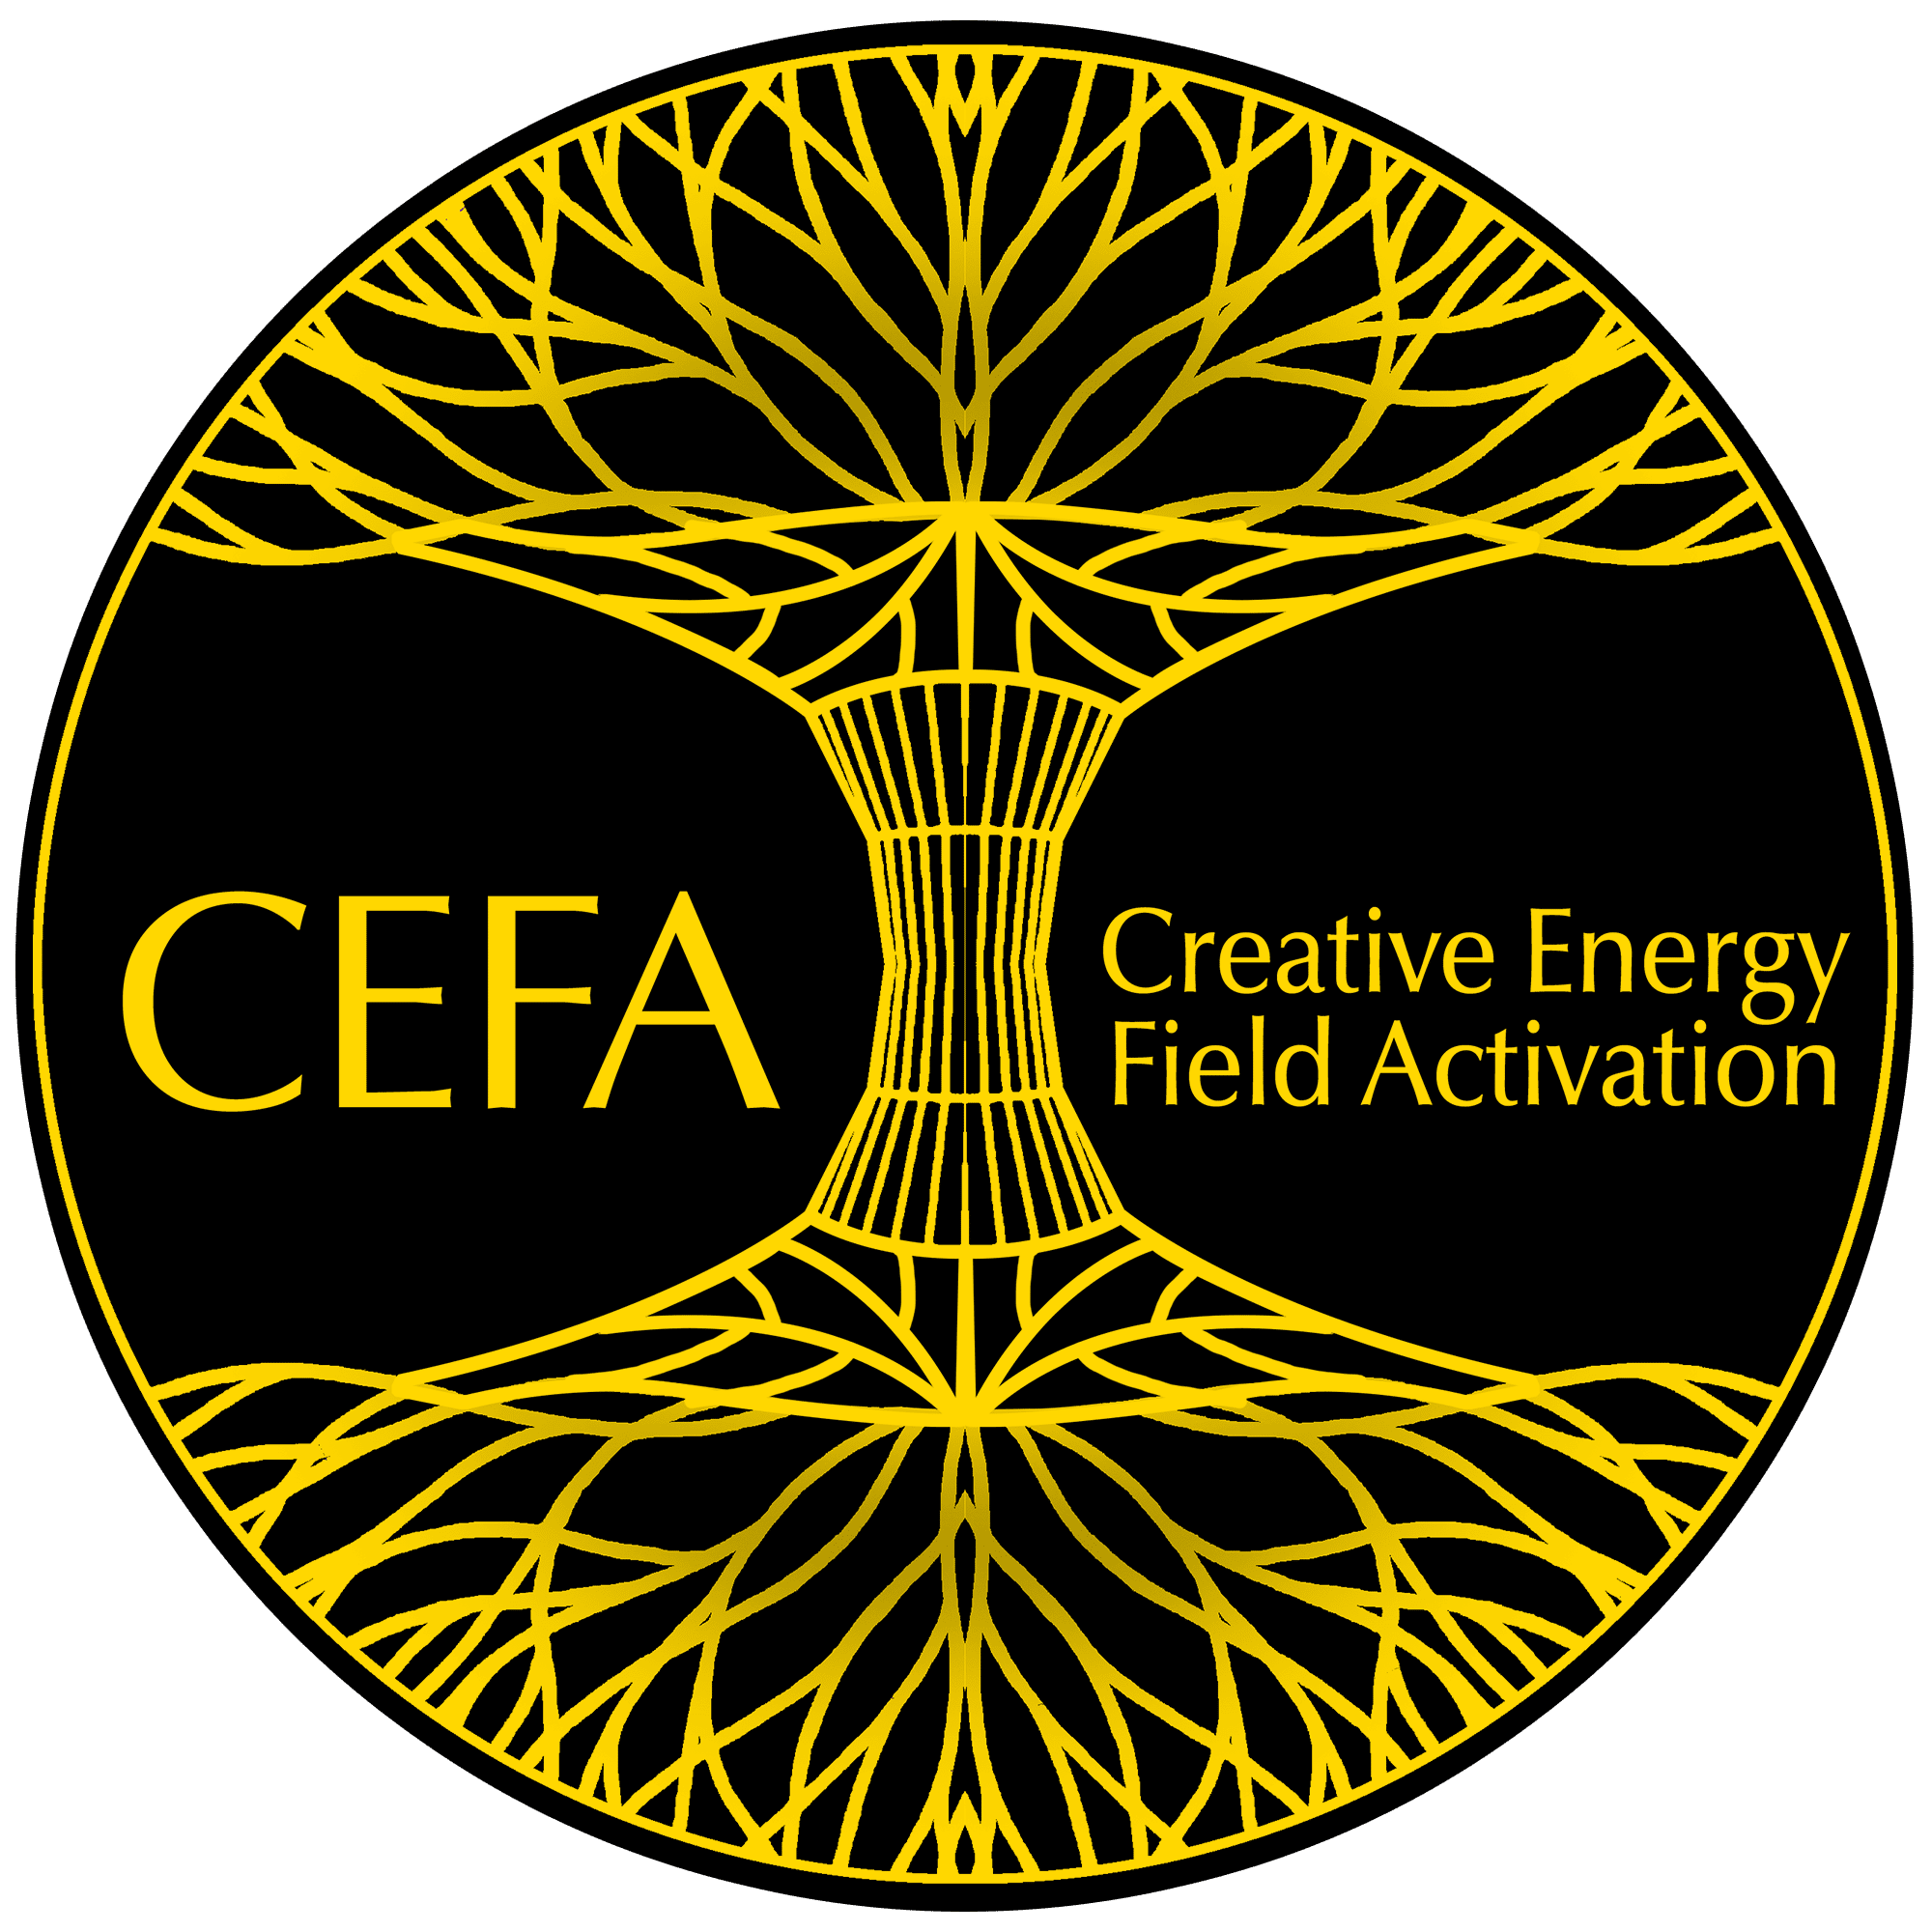 Creative Energy Field Activation (CEFA) is a multidimensional awakening modality. Held within it is an activation process, an assessment tool, an energetic resourcing practice, a vibrational coherence technique and an alchemical transmutation protocol. As a result of CEFA, people report a direct experience of their own divine nature and connection to source which allows them to feel an elevated connection to the world and all within it. #CEFA #CreativeEnergyFieldActivation #Creativity #Energy #power #Transformation #training #personalDevelopment #mastery #certification #core #intelligence #wisdom #foundation #connection #emotion #health #mental #healing #coaching #spiritual #community #superpowerexperts